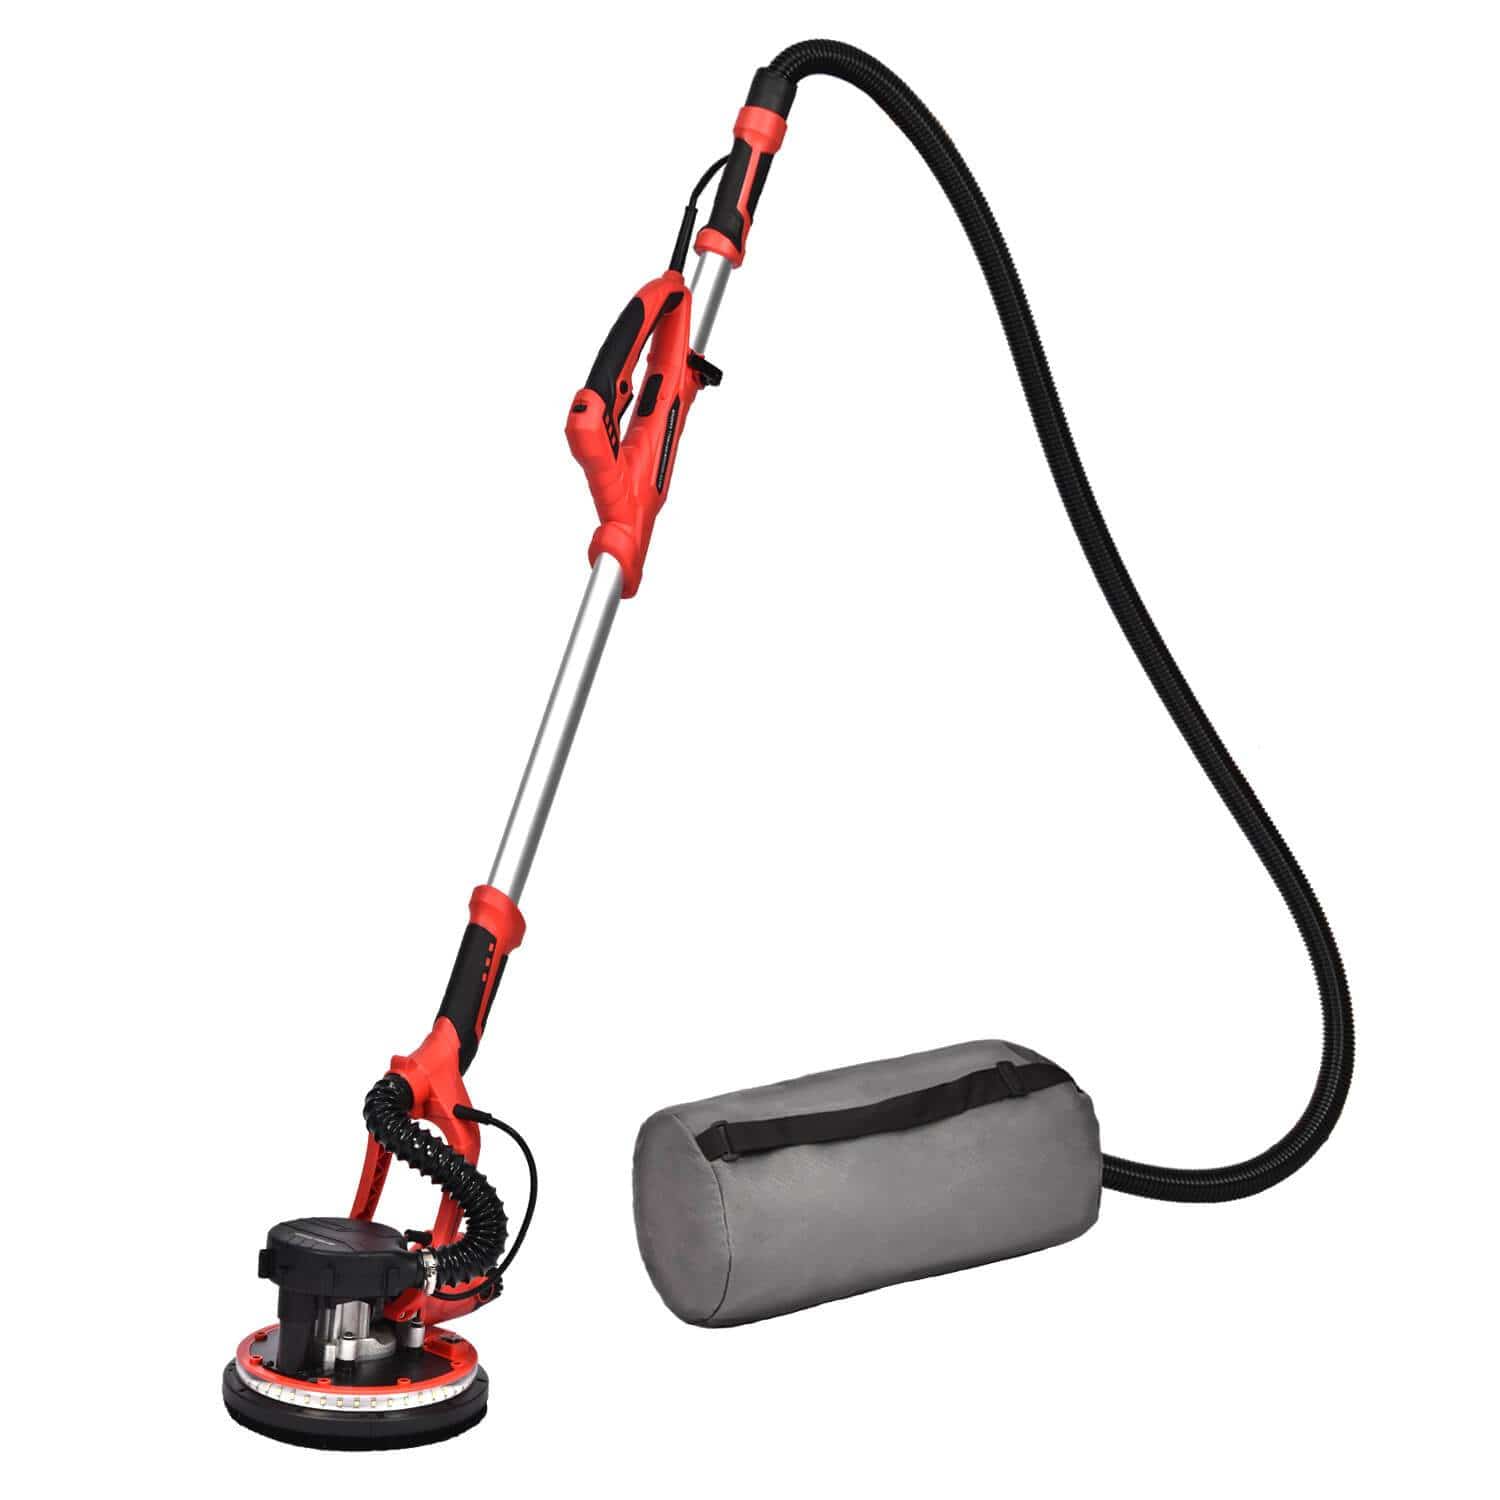 Elecwish 800W Electric Drywall Sander front view